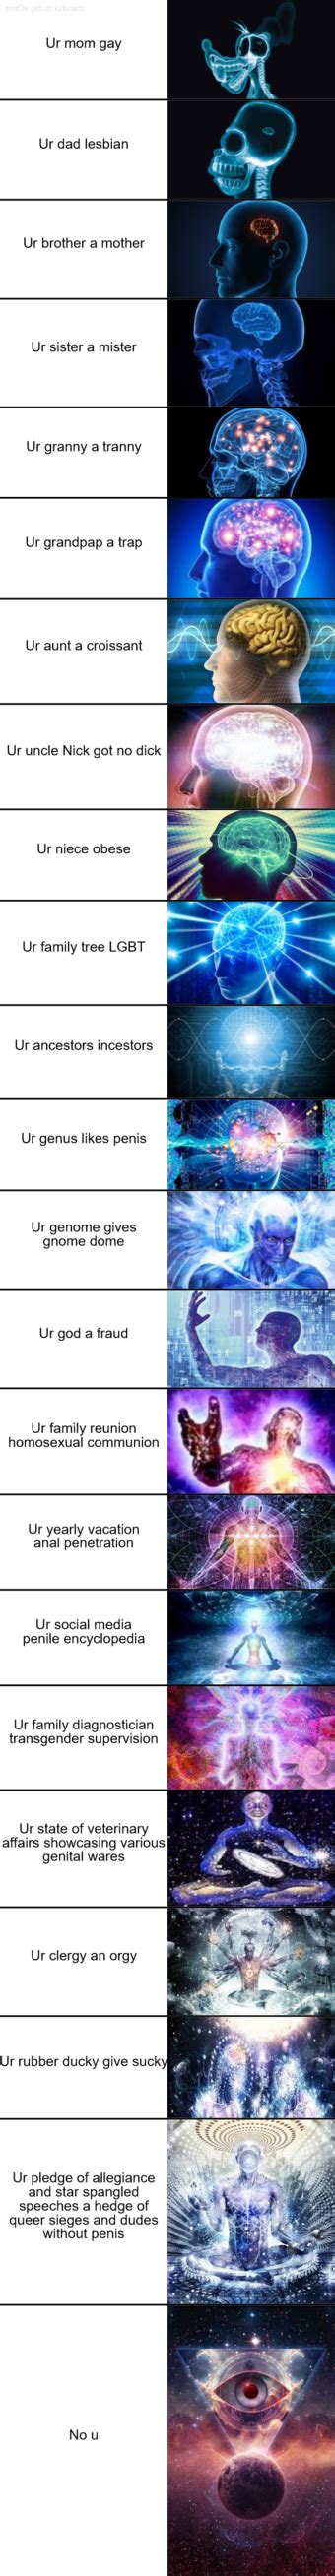 30 transcendence memes ranked in order of popularity and relevancy. Ultimate ur mom gay transcendence meme : PewdiepieSubmissions